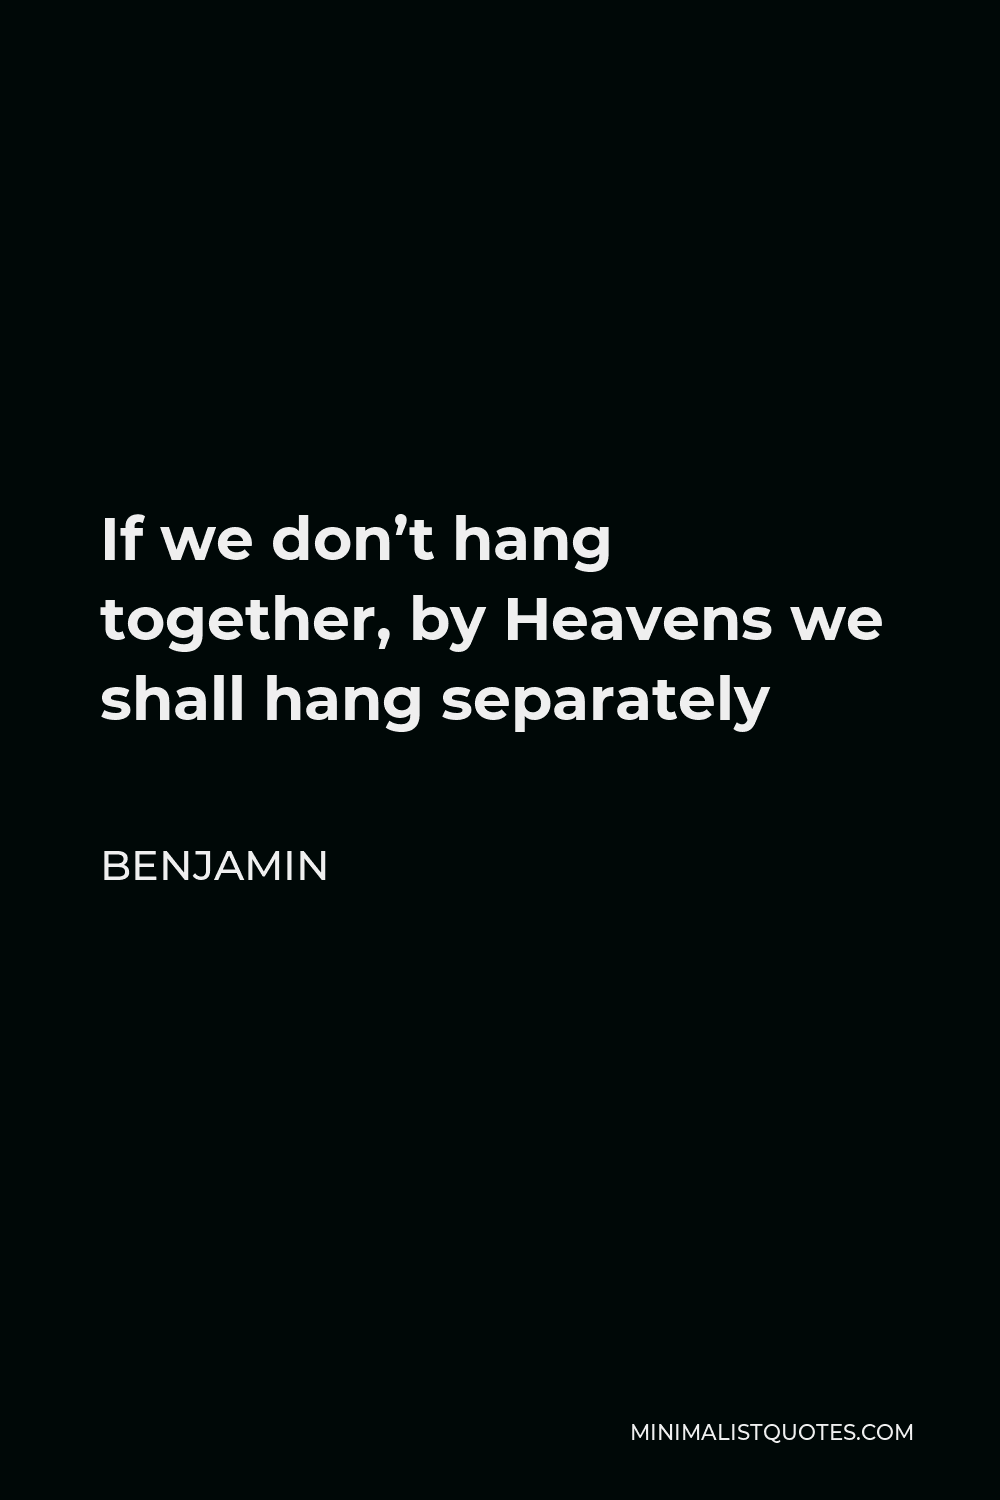 Benjamin Quote - If we don’t hang together, by Heavens we shall hang separately